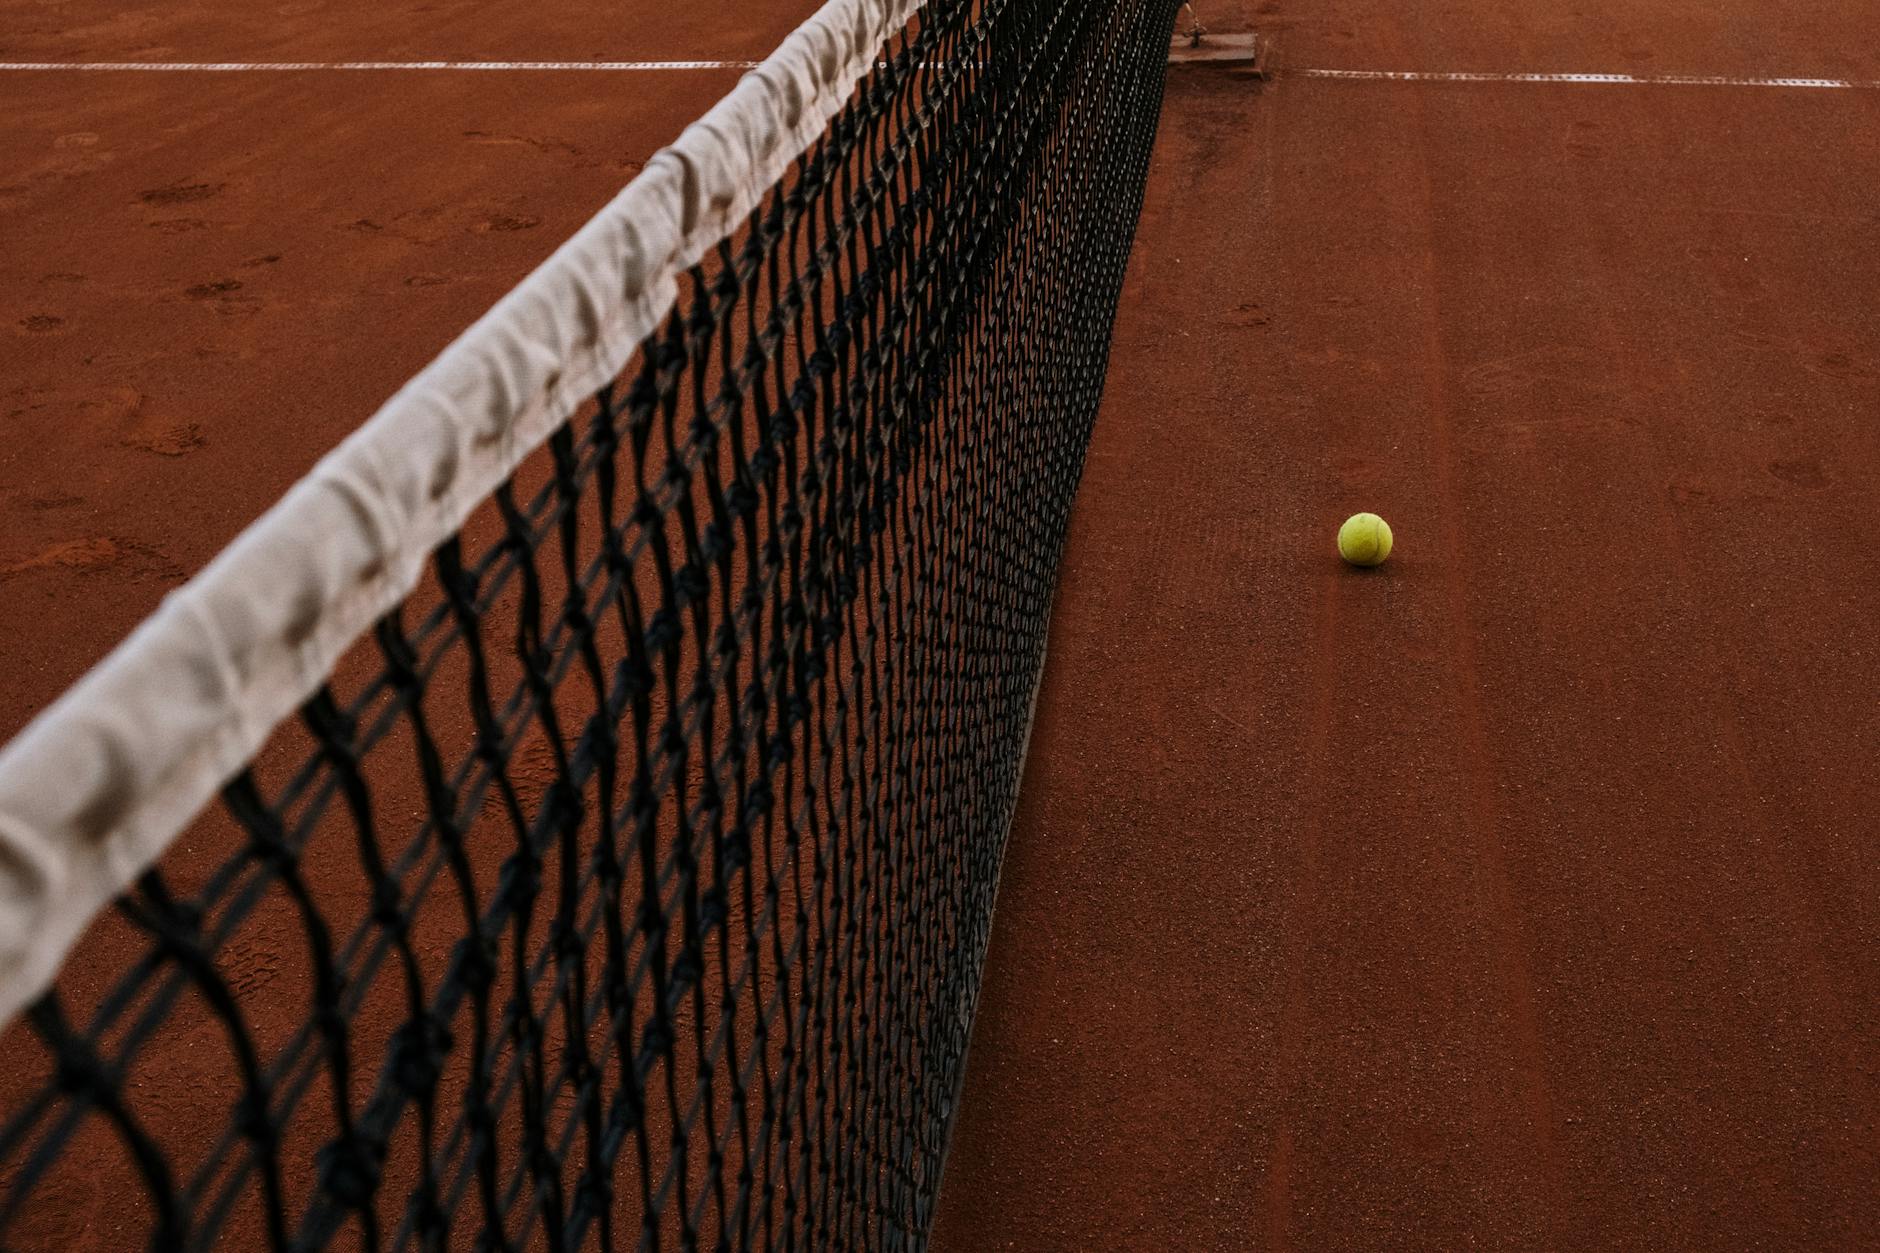 yellow tennis ball lying on clay court by net